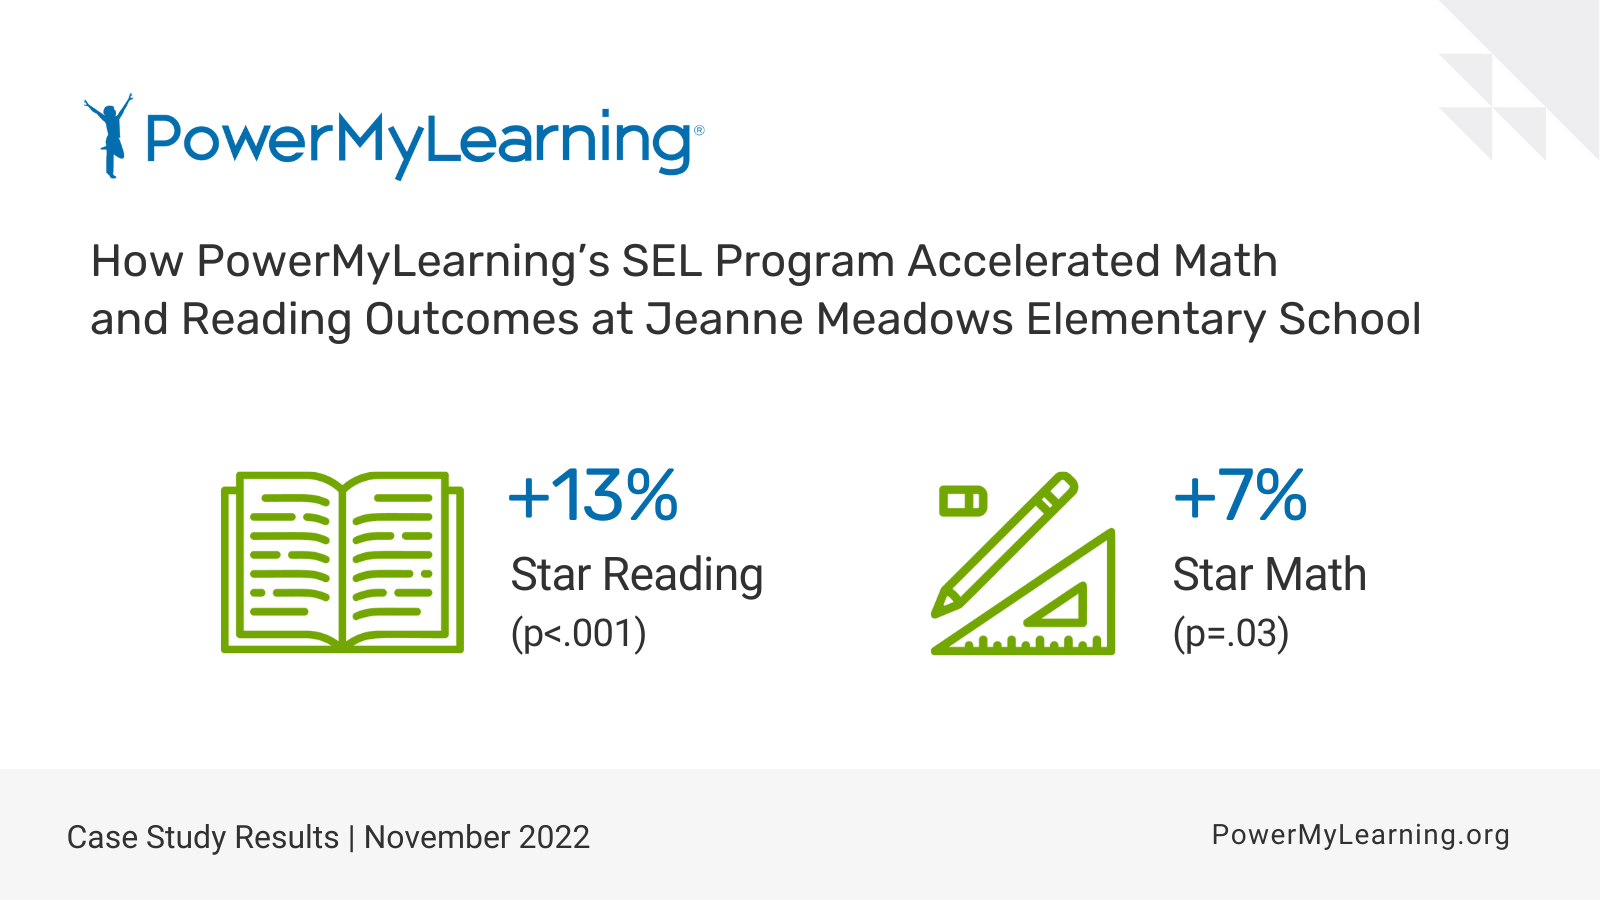 New Study Finds that PowerMyLearning’s SEL Program Accelerates Math and Reading Outcomes and Improves Student Behavior